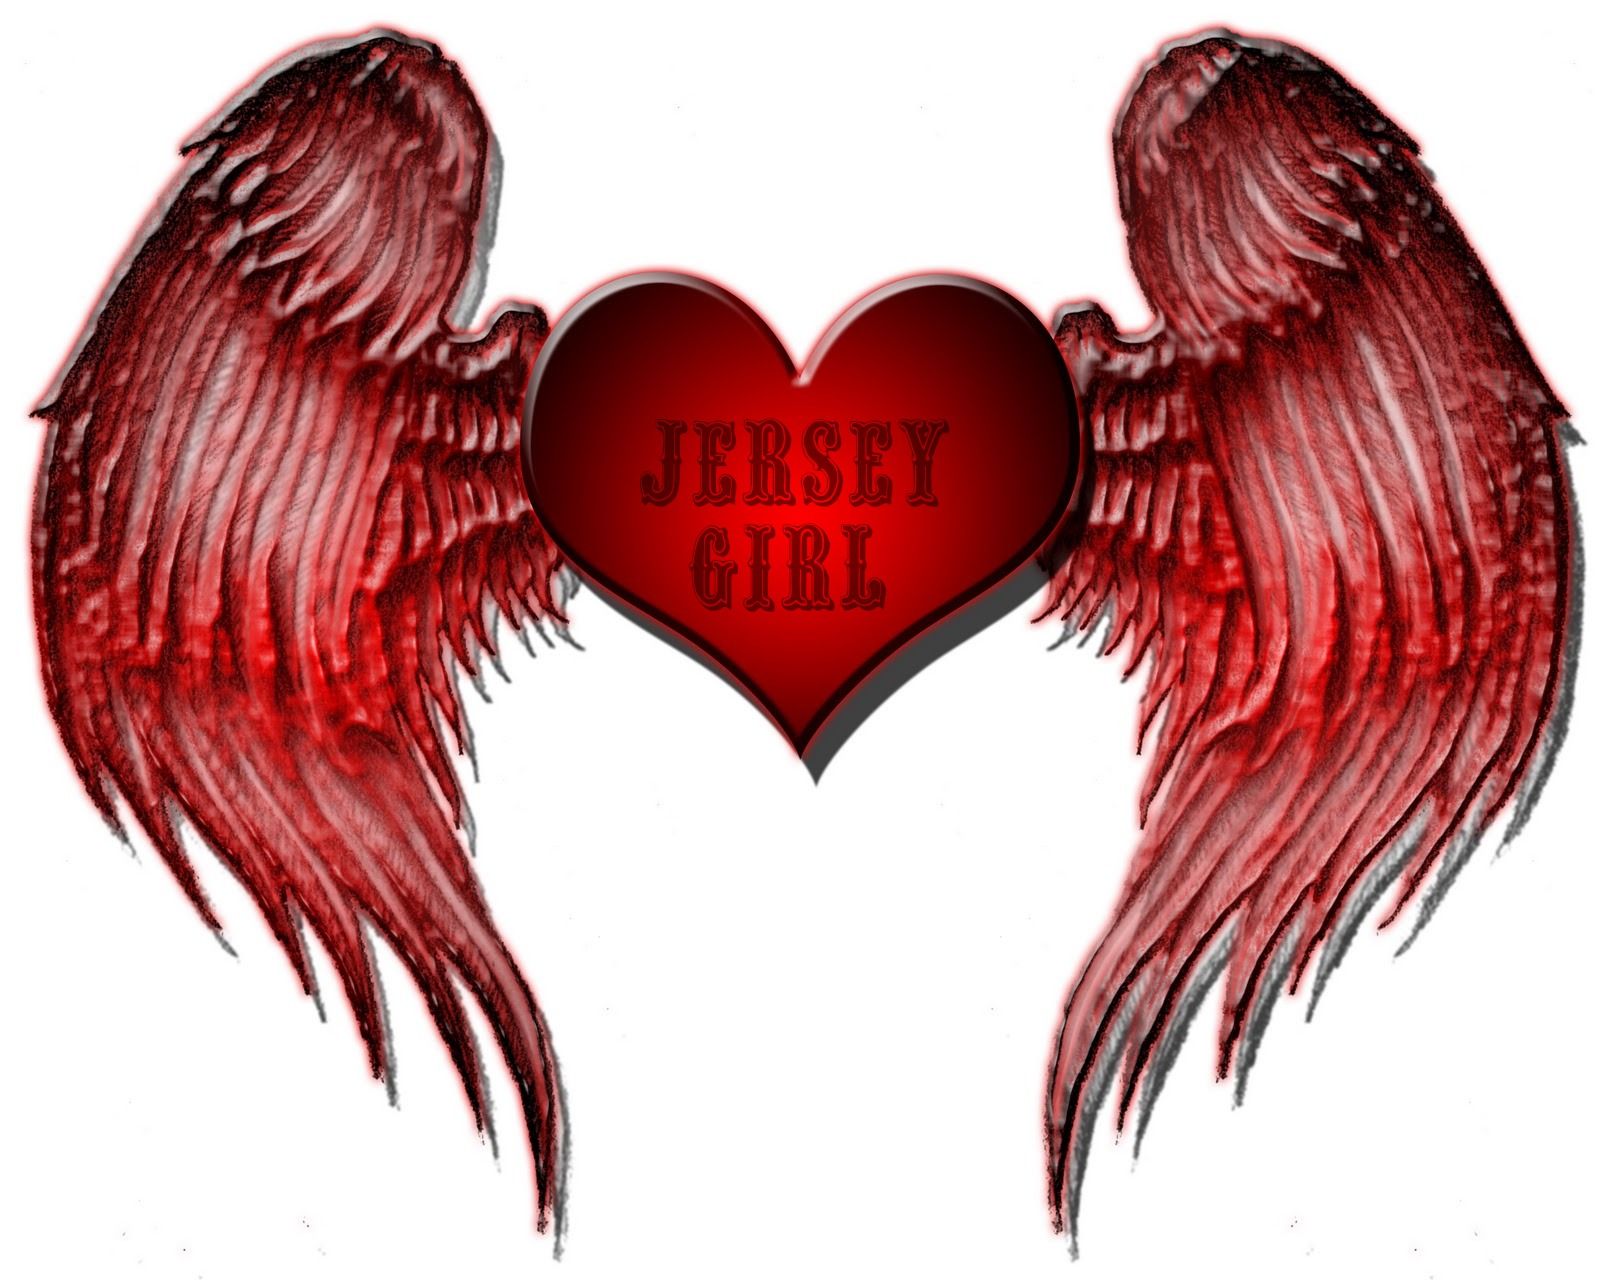 Jersey Girls. Heart with wings, Heart with wings tattoo, Heart wallpaper